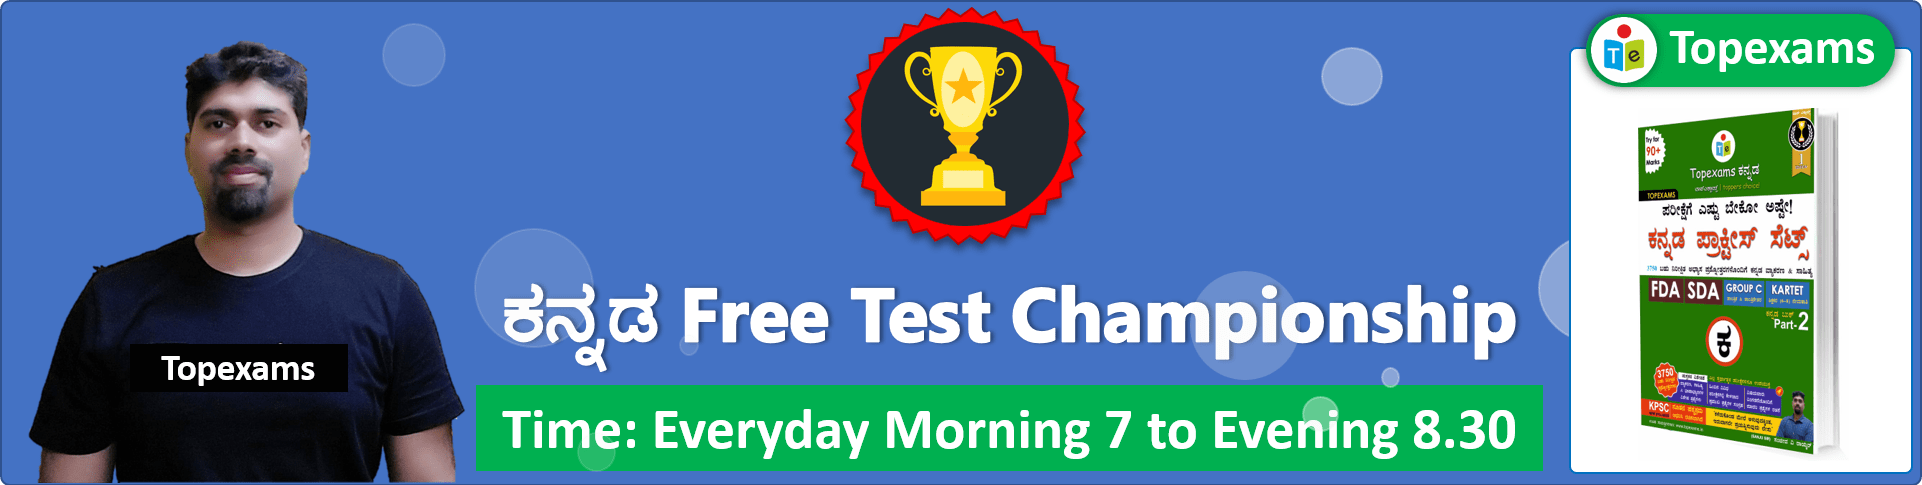 You are currently viewing Test-11 ಕನ್ನಡ Championship  For SDA, FDA, Group C, KARTET